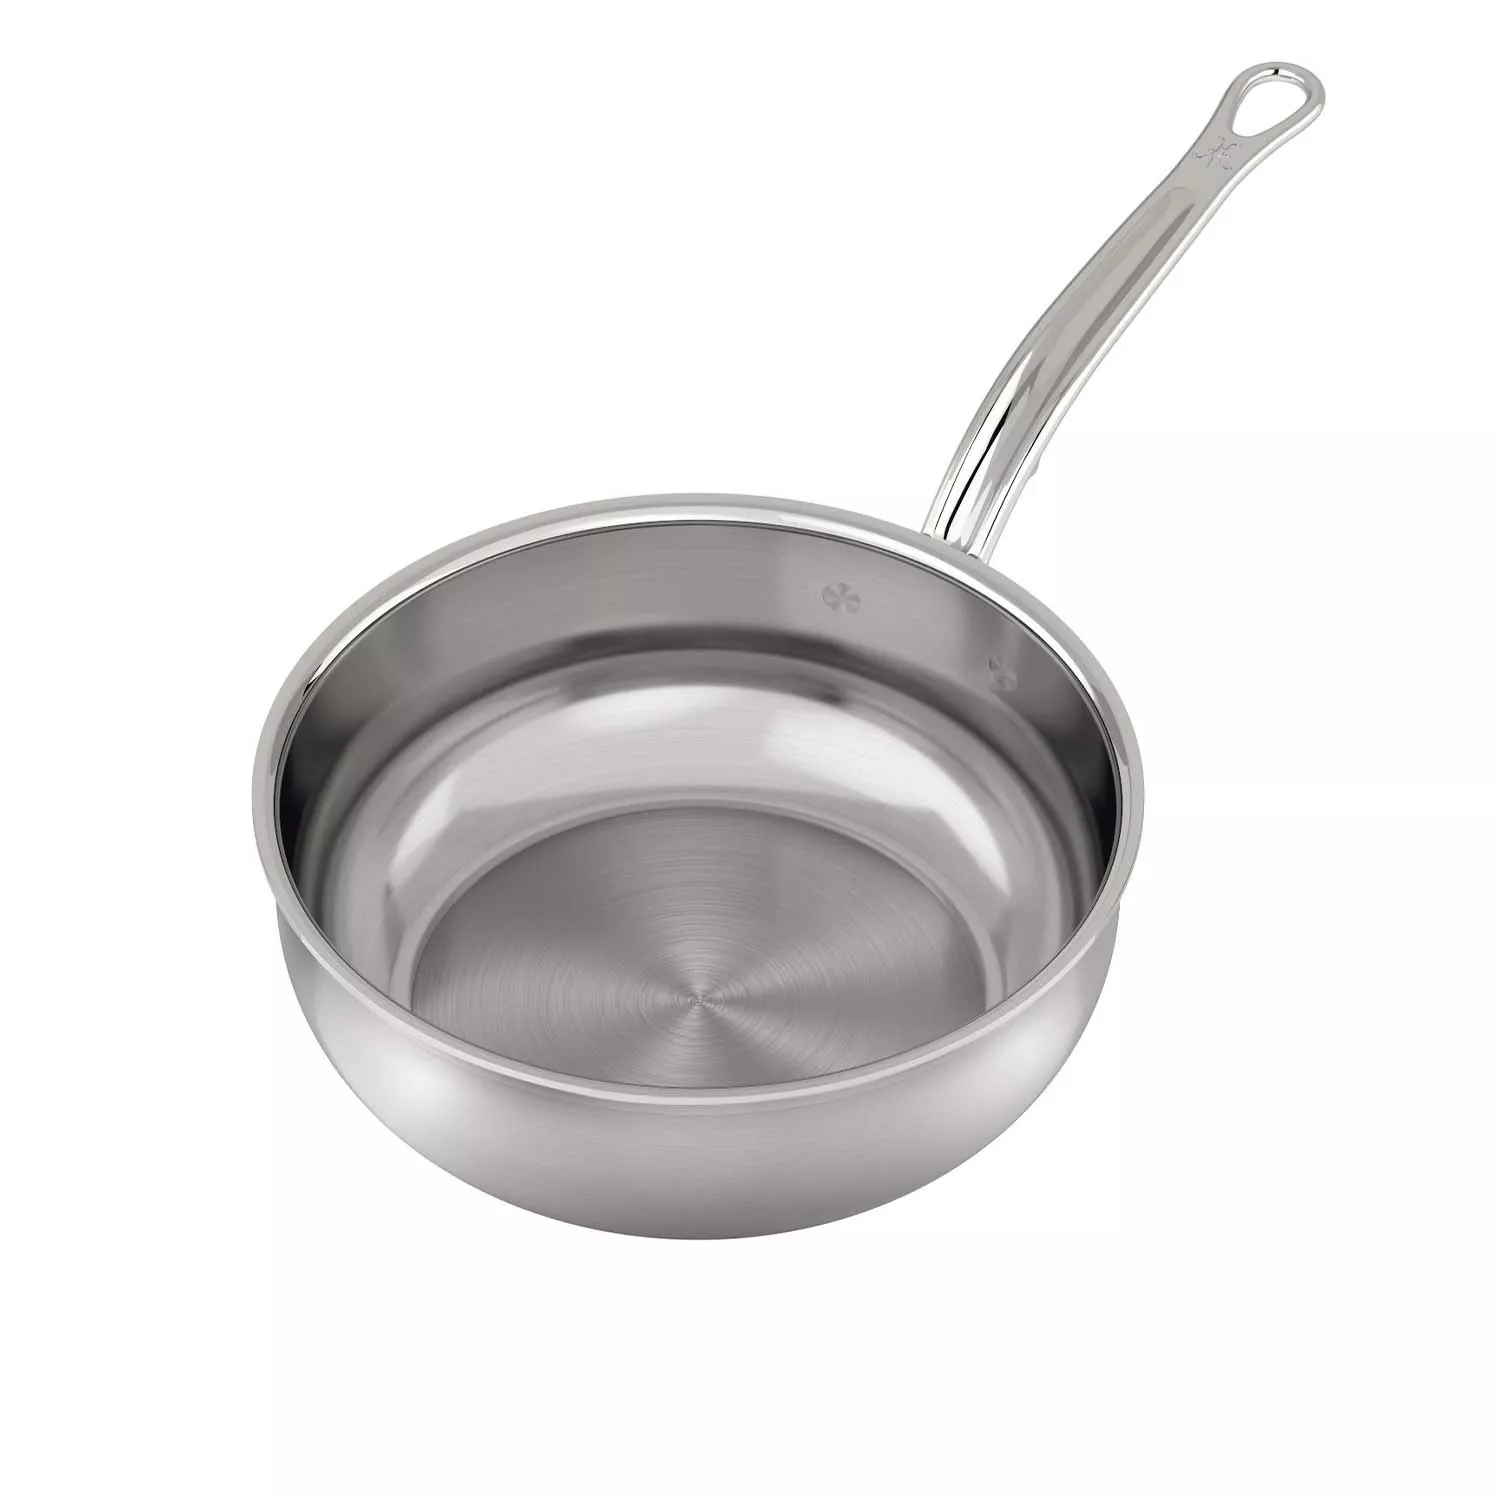 Hestan ProBond Stainless Steel Essential Pan with Lid, 3.5-Quart